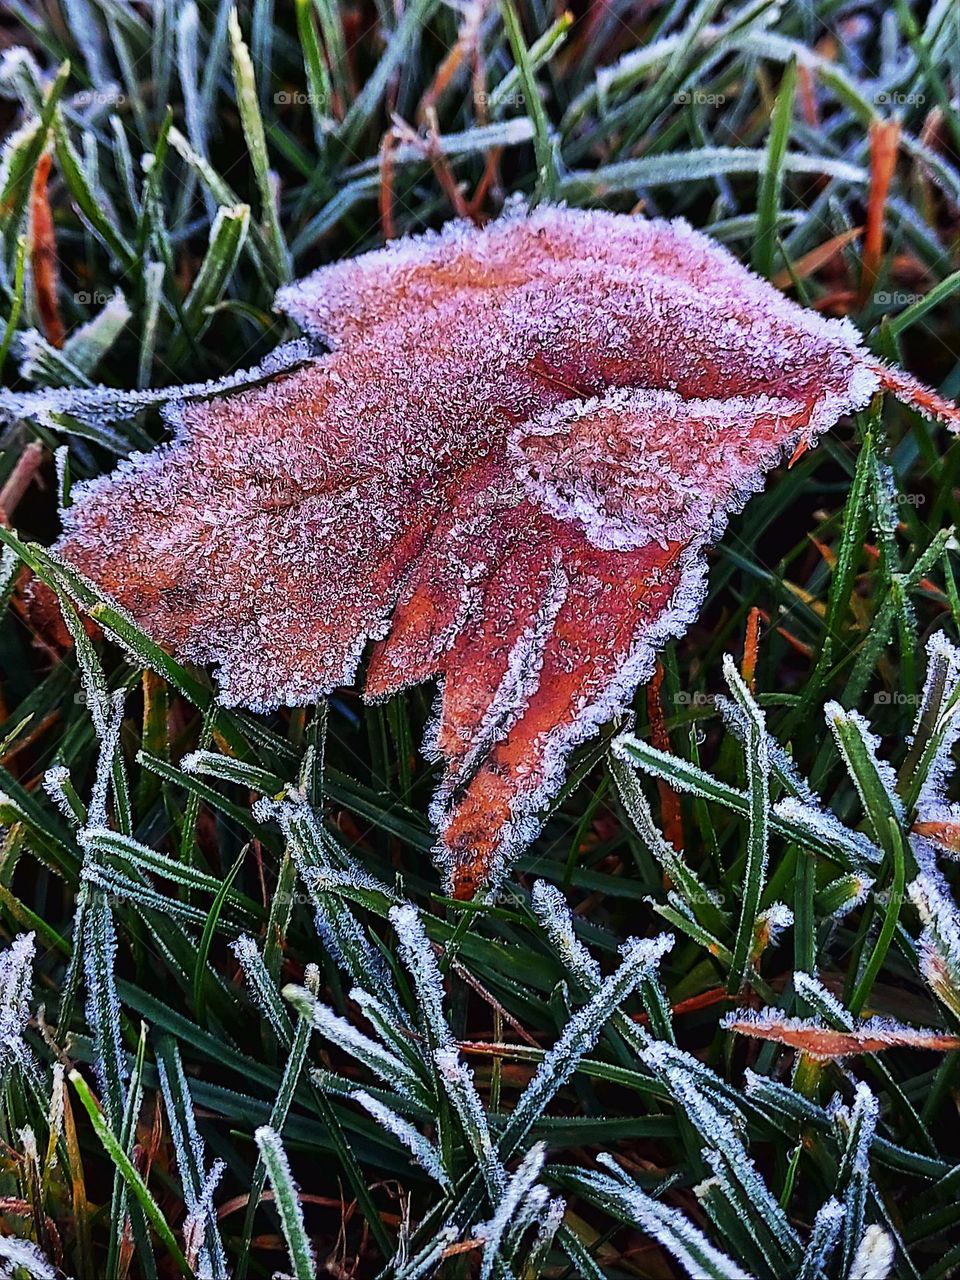 Early morning frostiness on a fallen leaf and blades of grass.